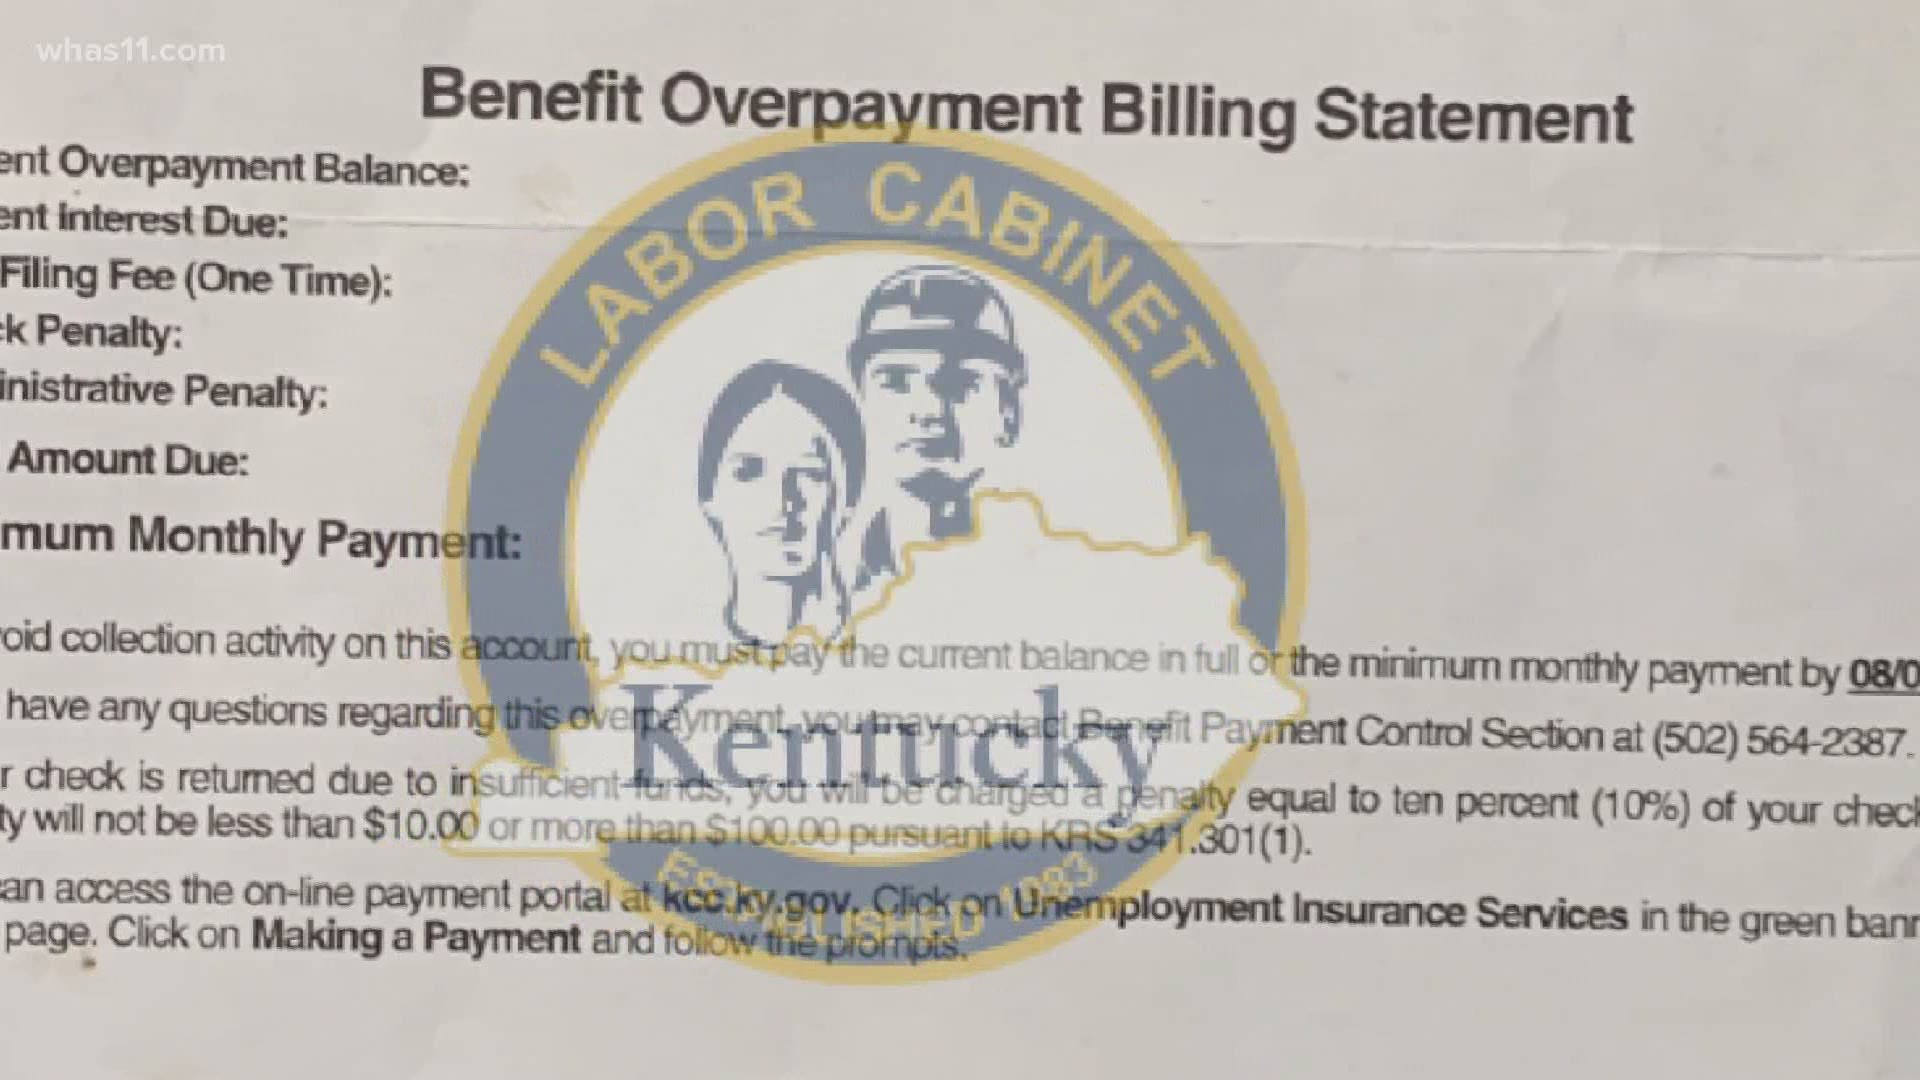 It's a bill from the state demanding they return thousands of dollars in unemployment benefits.